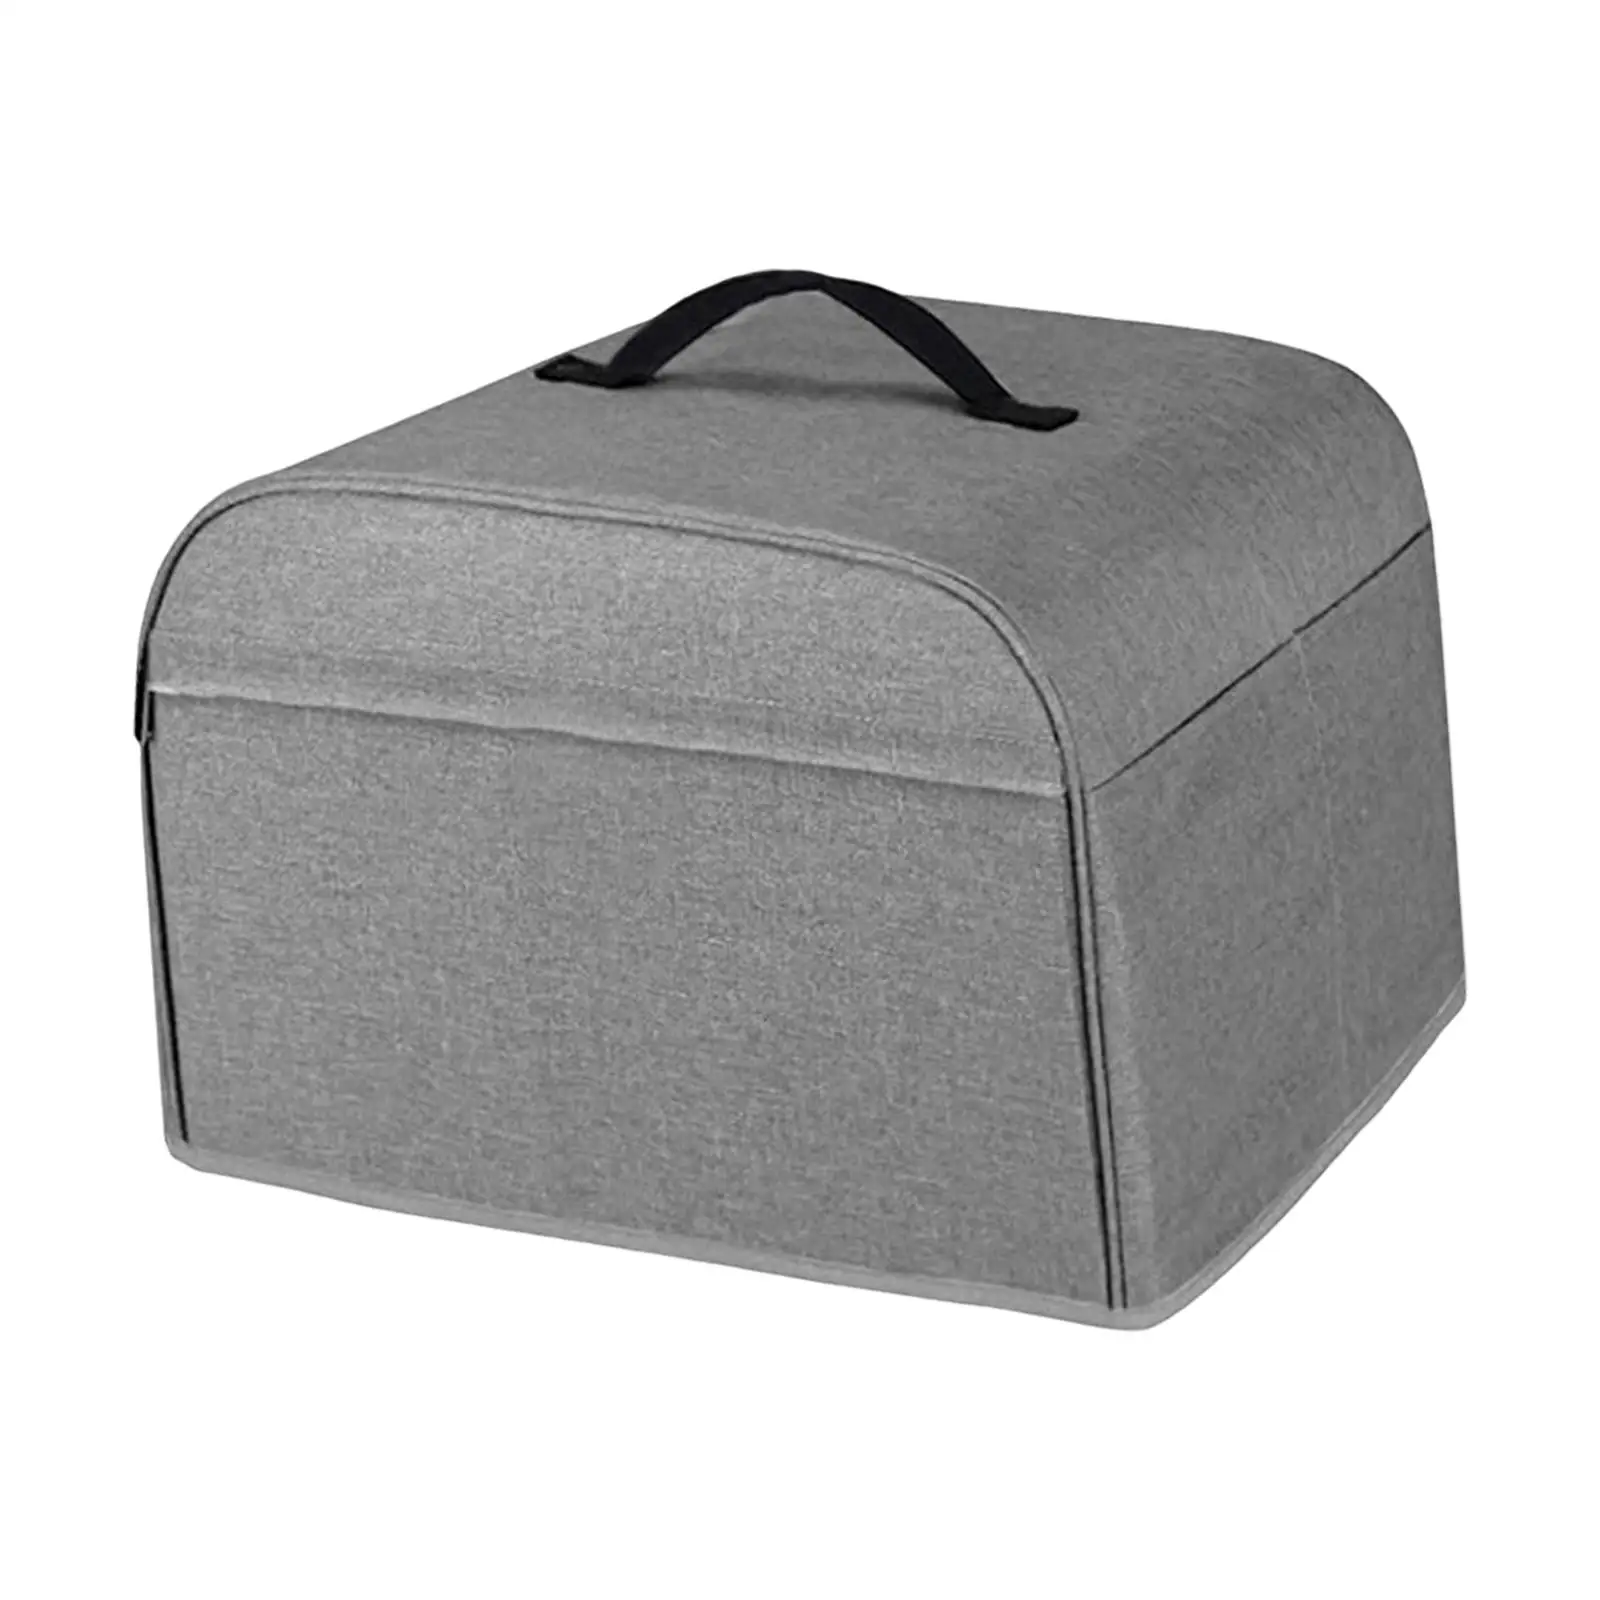 Picnic Portable Storage Bag bbq Cover bbq Accessories Bag BBQ Accessory Organizer bbq Storage bag for outdoor